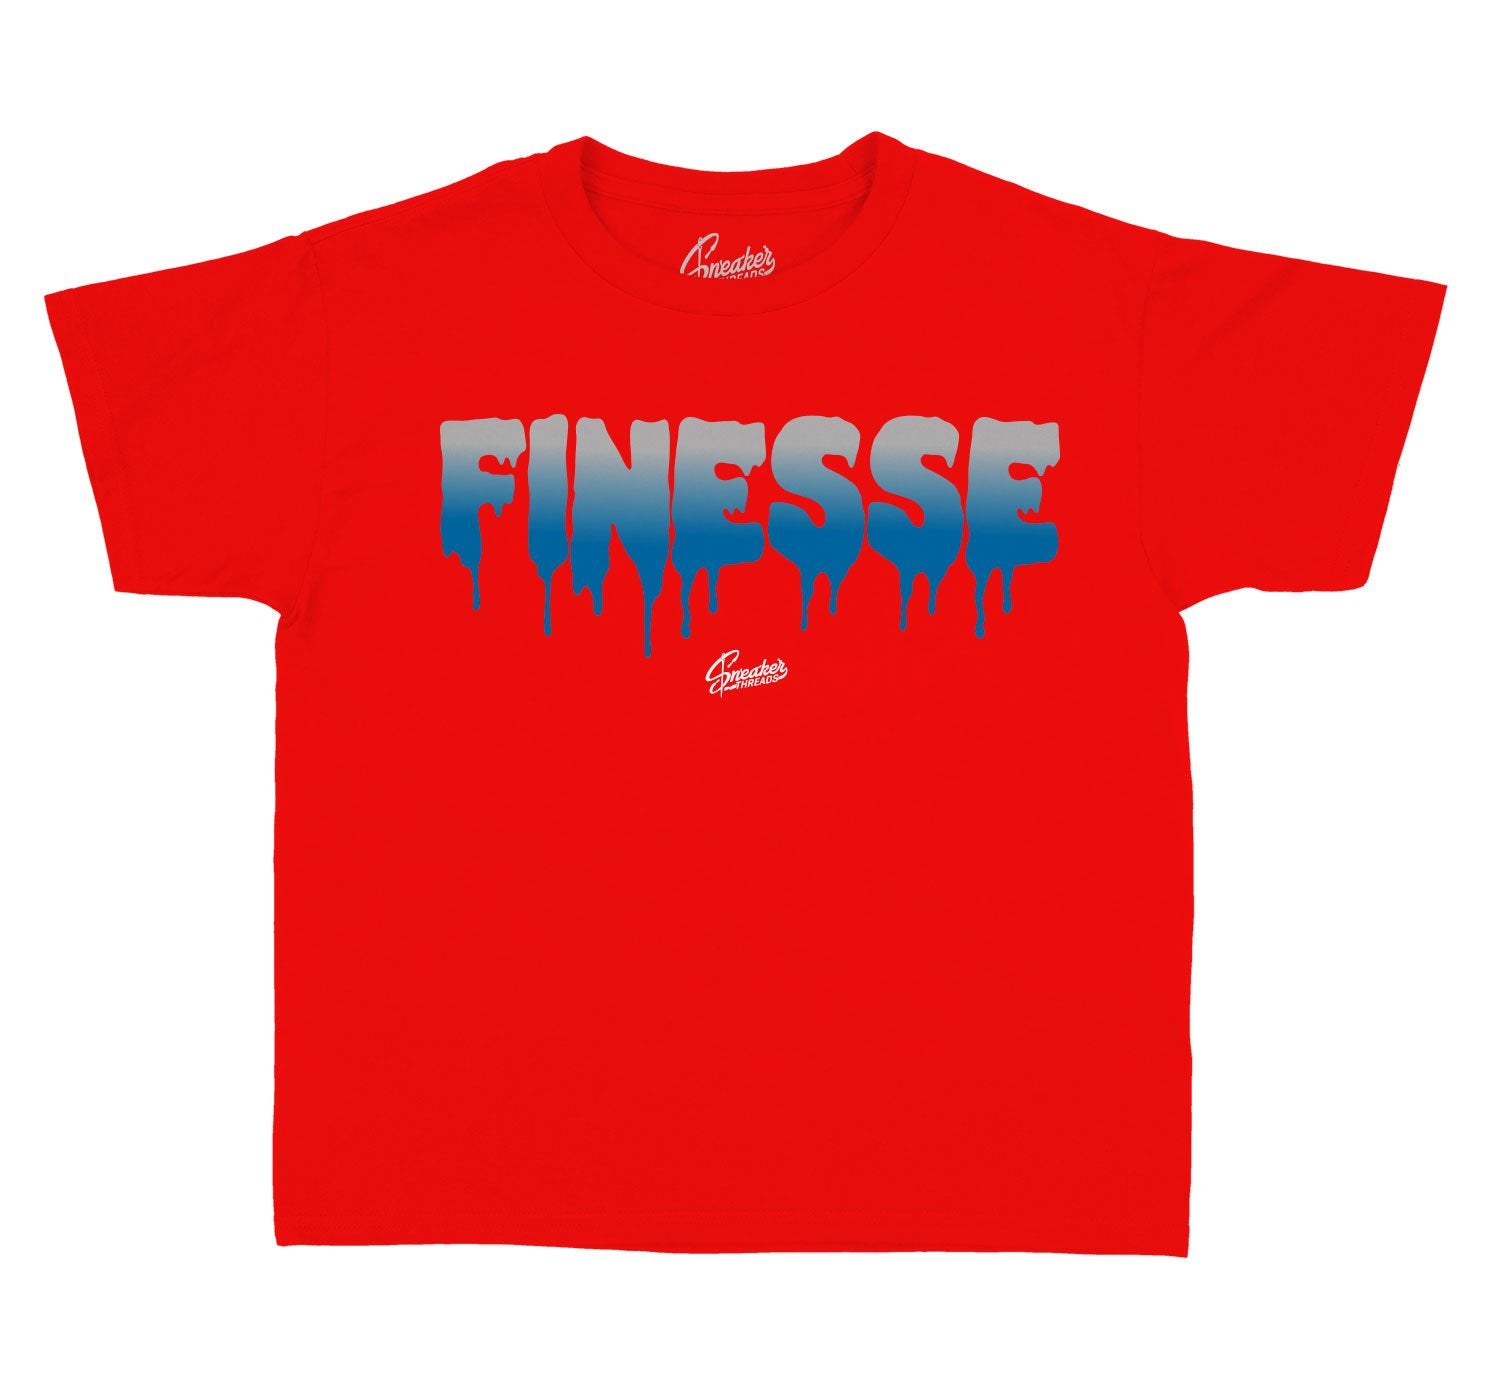 Jordan Finesse 4 What The Four Sneaker shirts